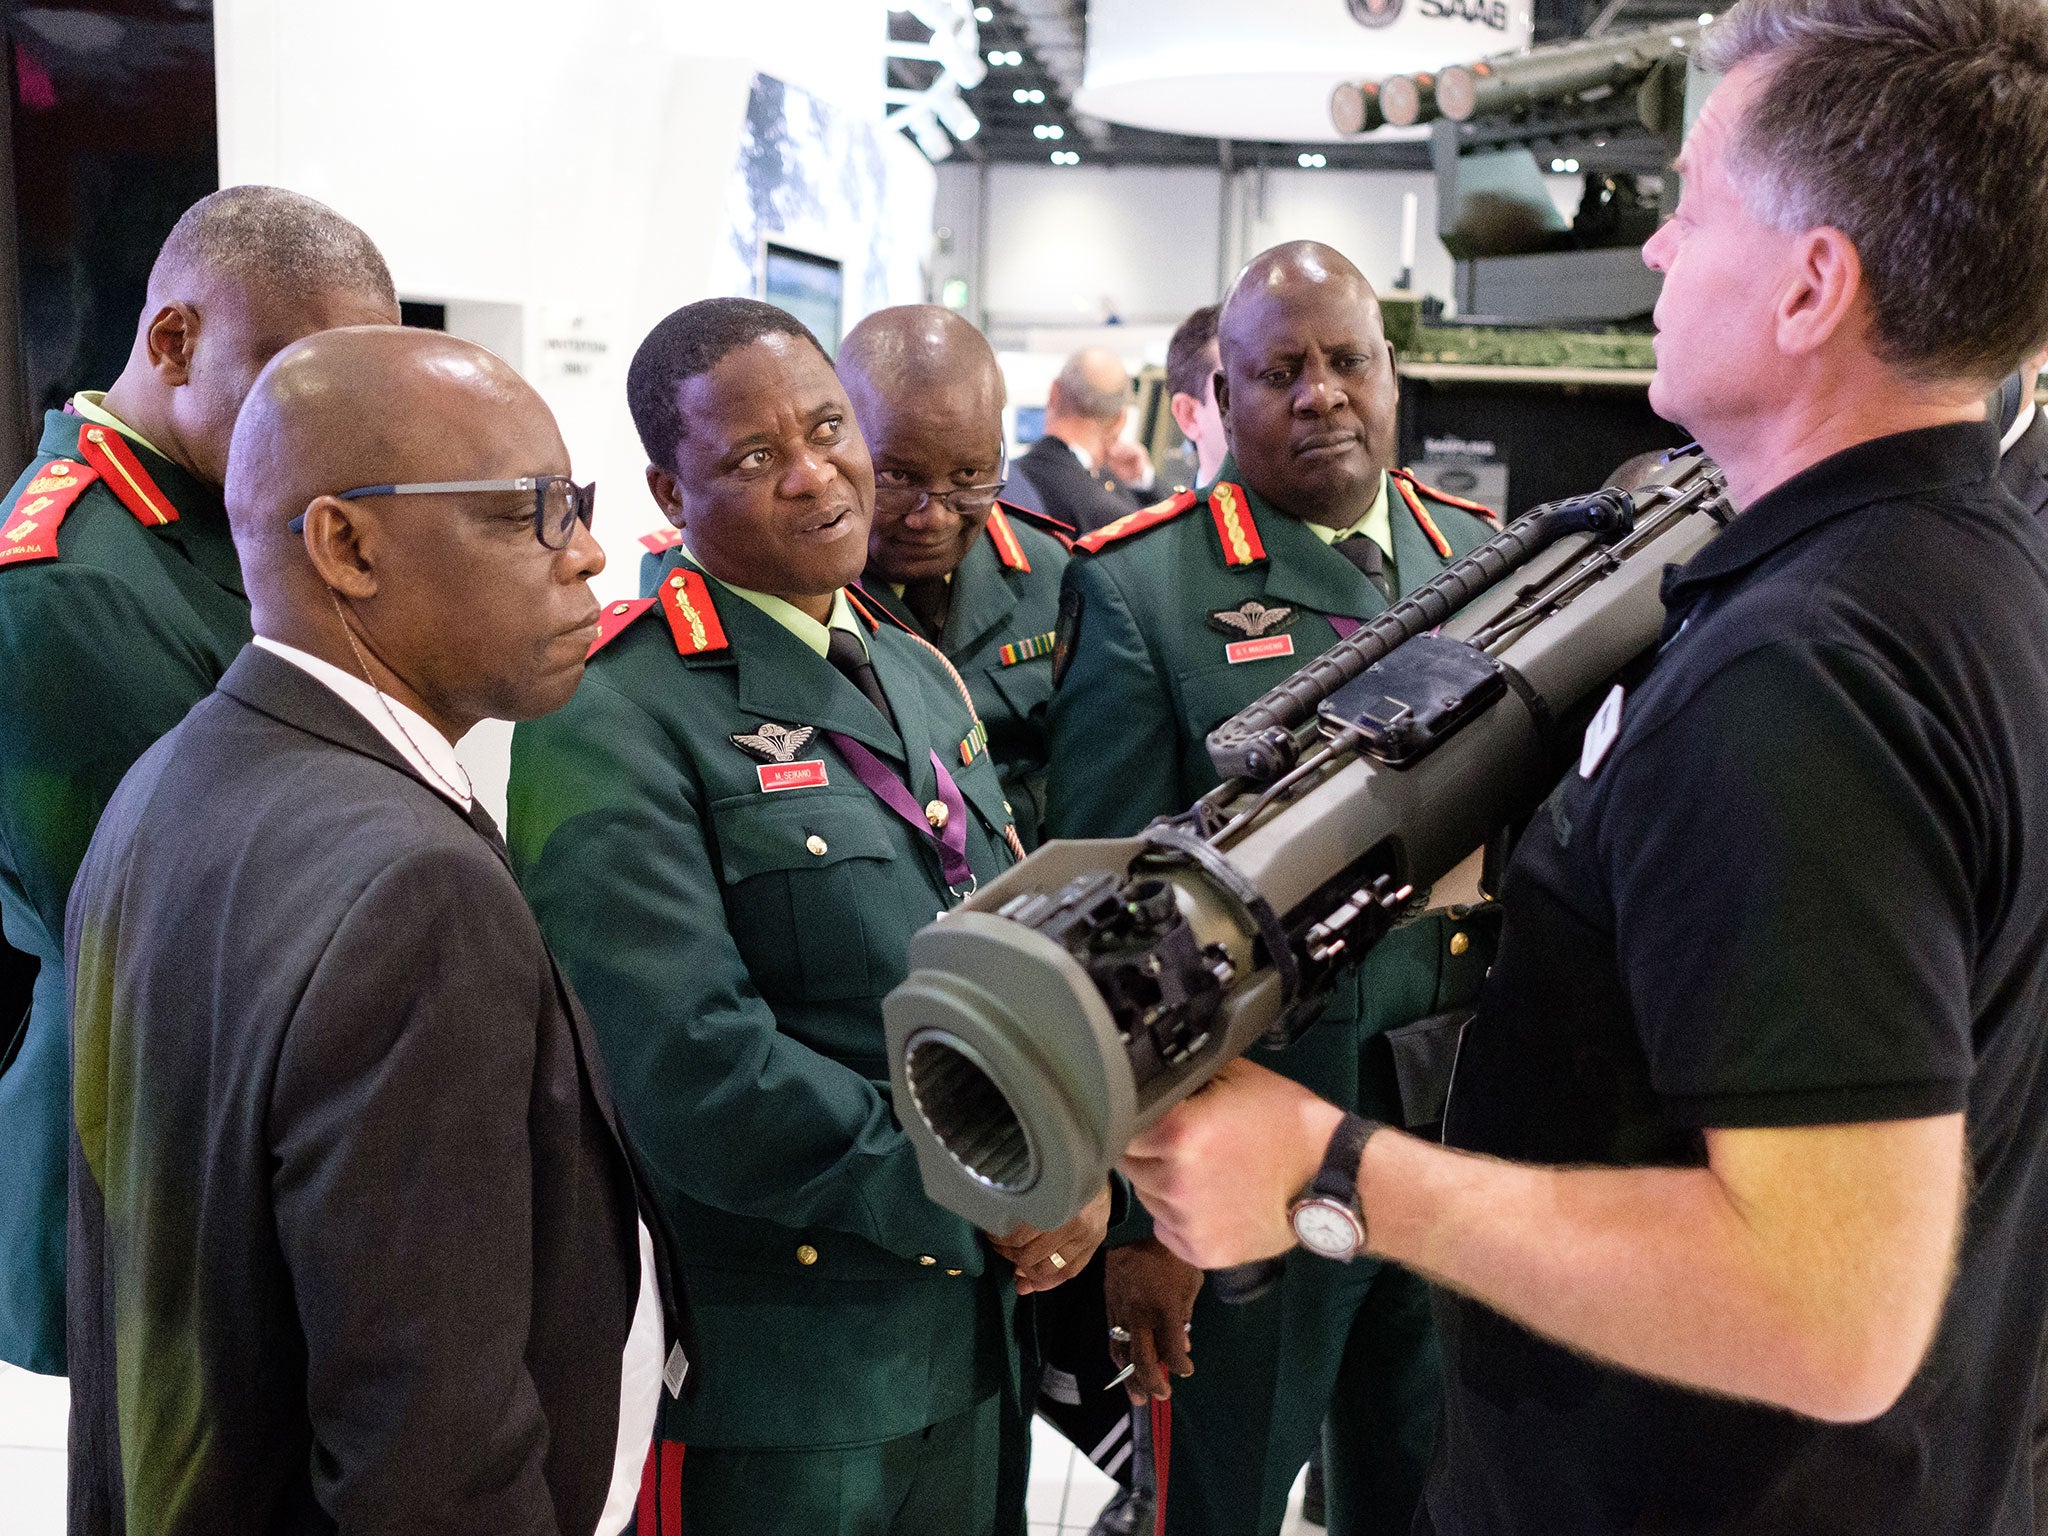 A group from the Botswana military watch as a member of the SAAB team explains their latest rocket-propelled weapons at the DSEI arms fair on 12 September